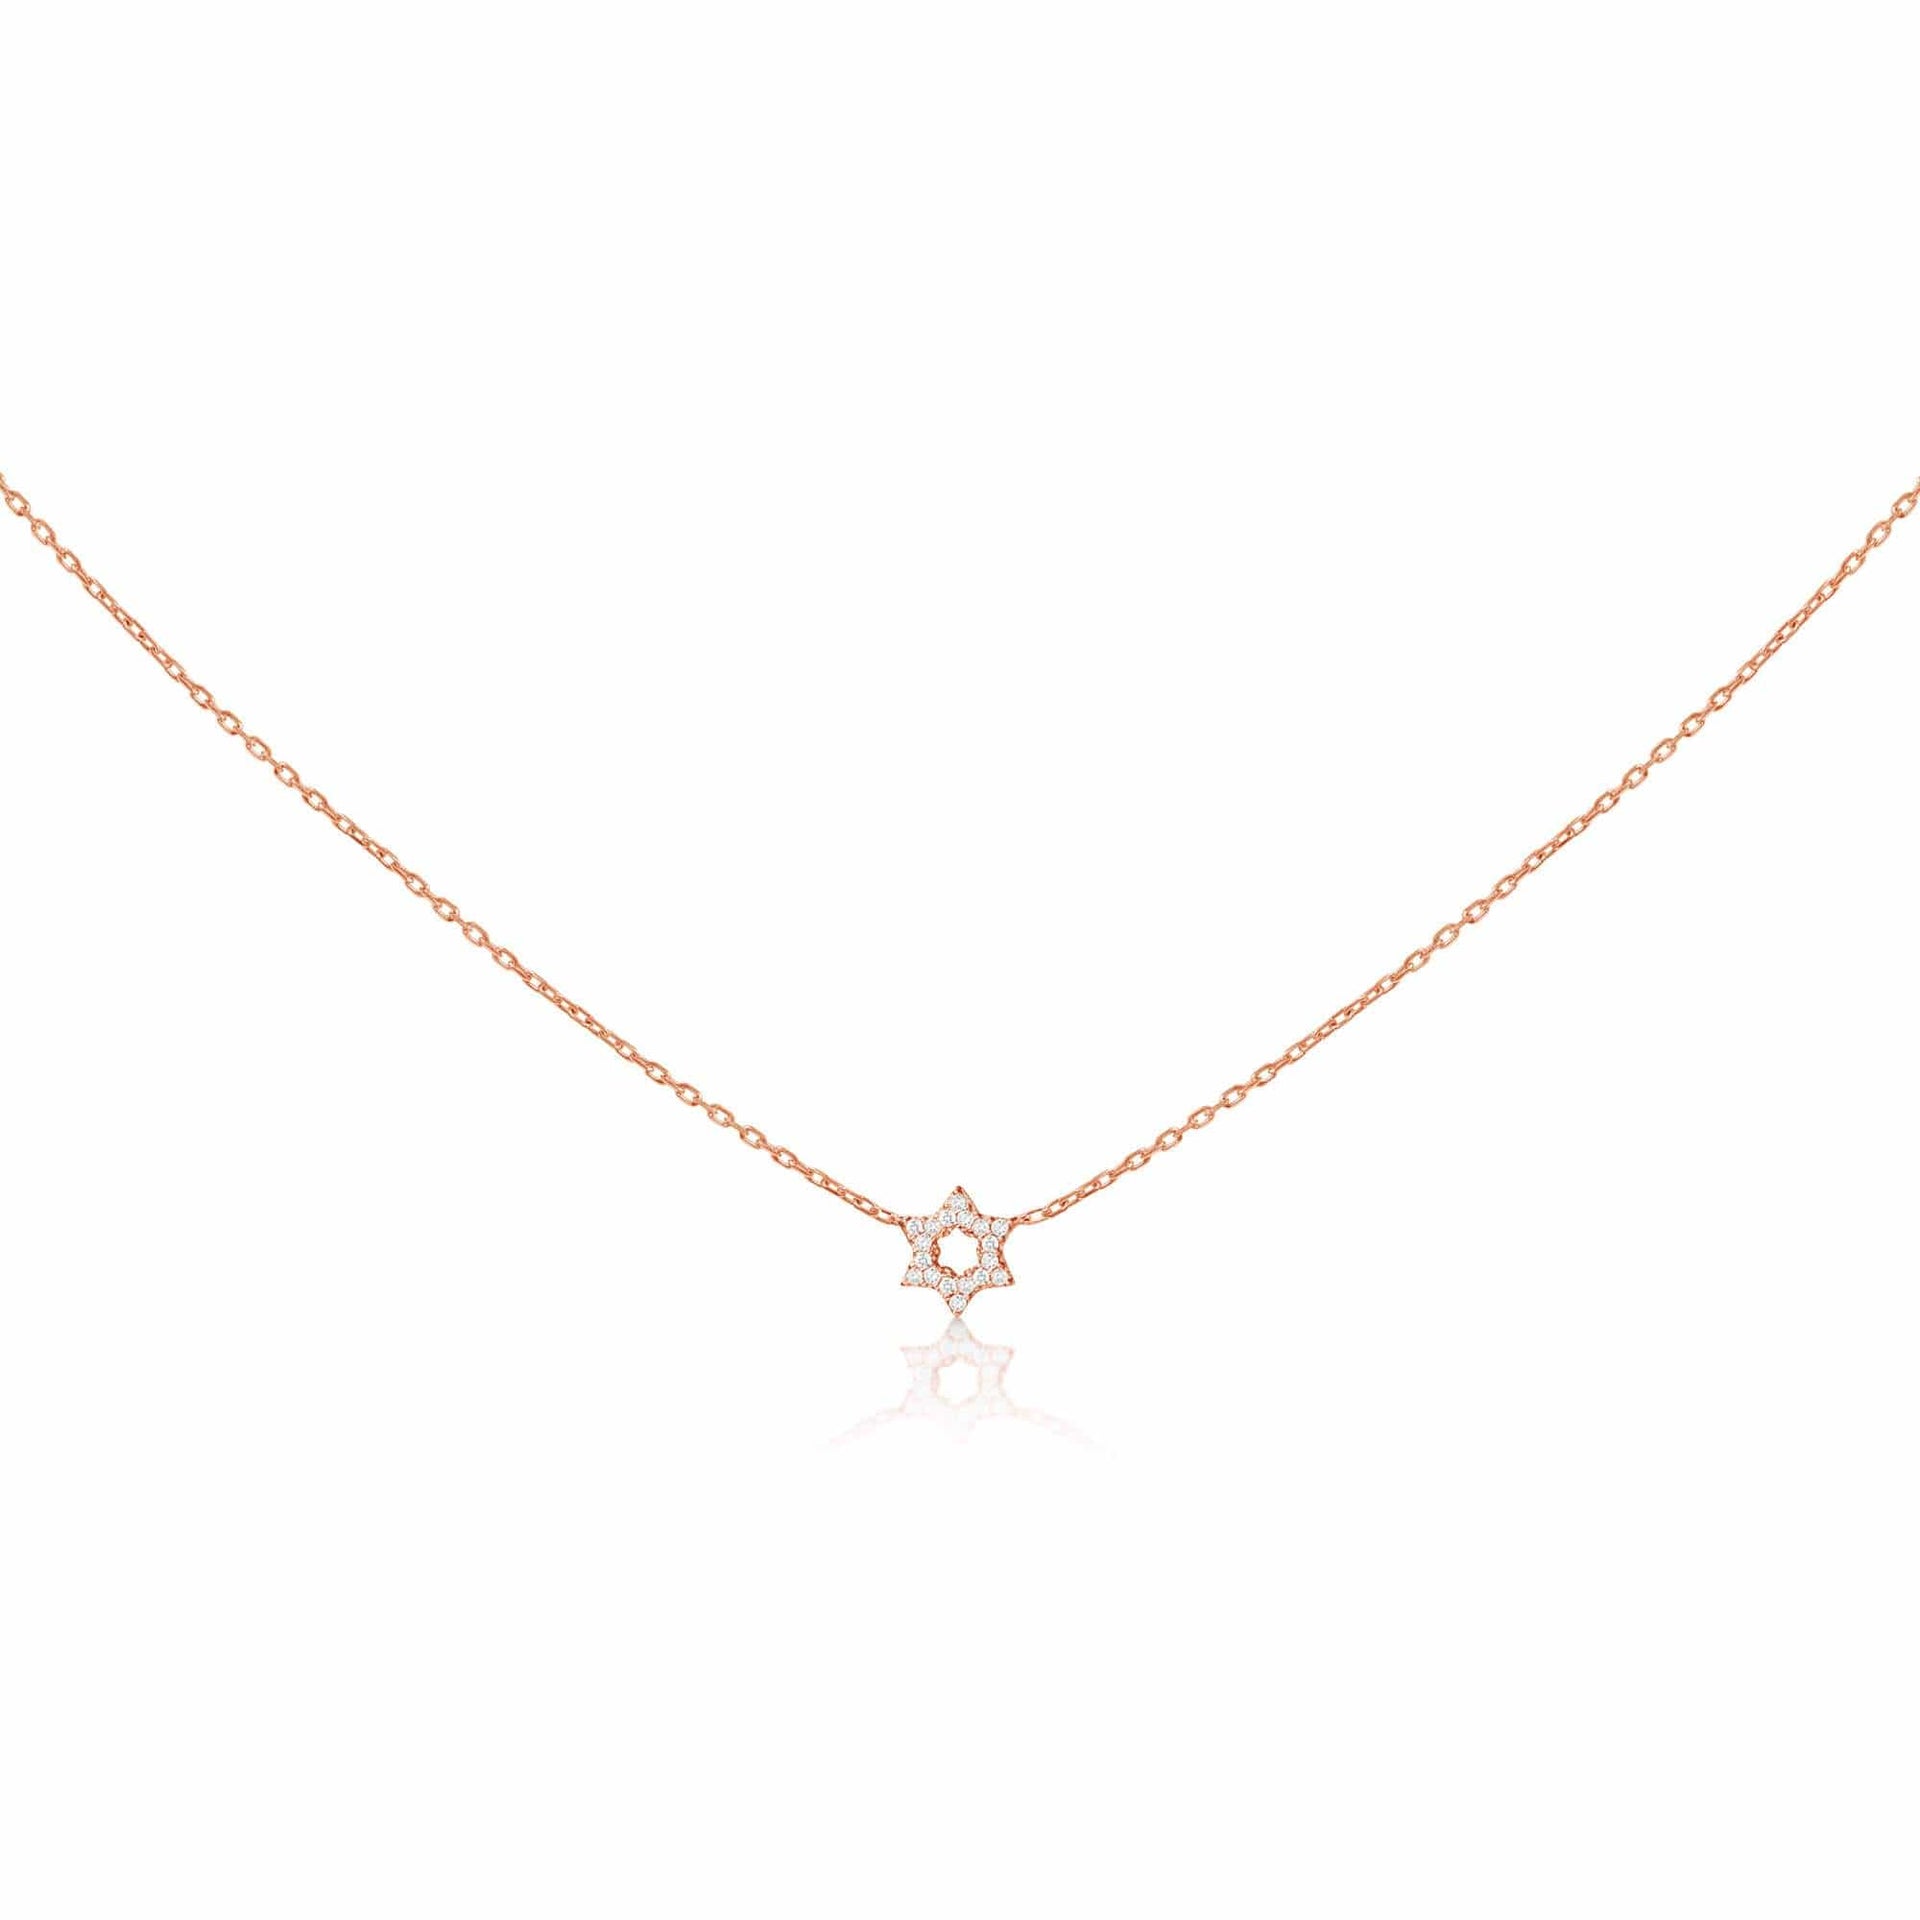 Diamond Pendant with Jewish Star of David in 14K Yellow Gold, White Gold or Rose Gold - Rose Gold 16 Chain